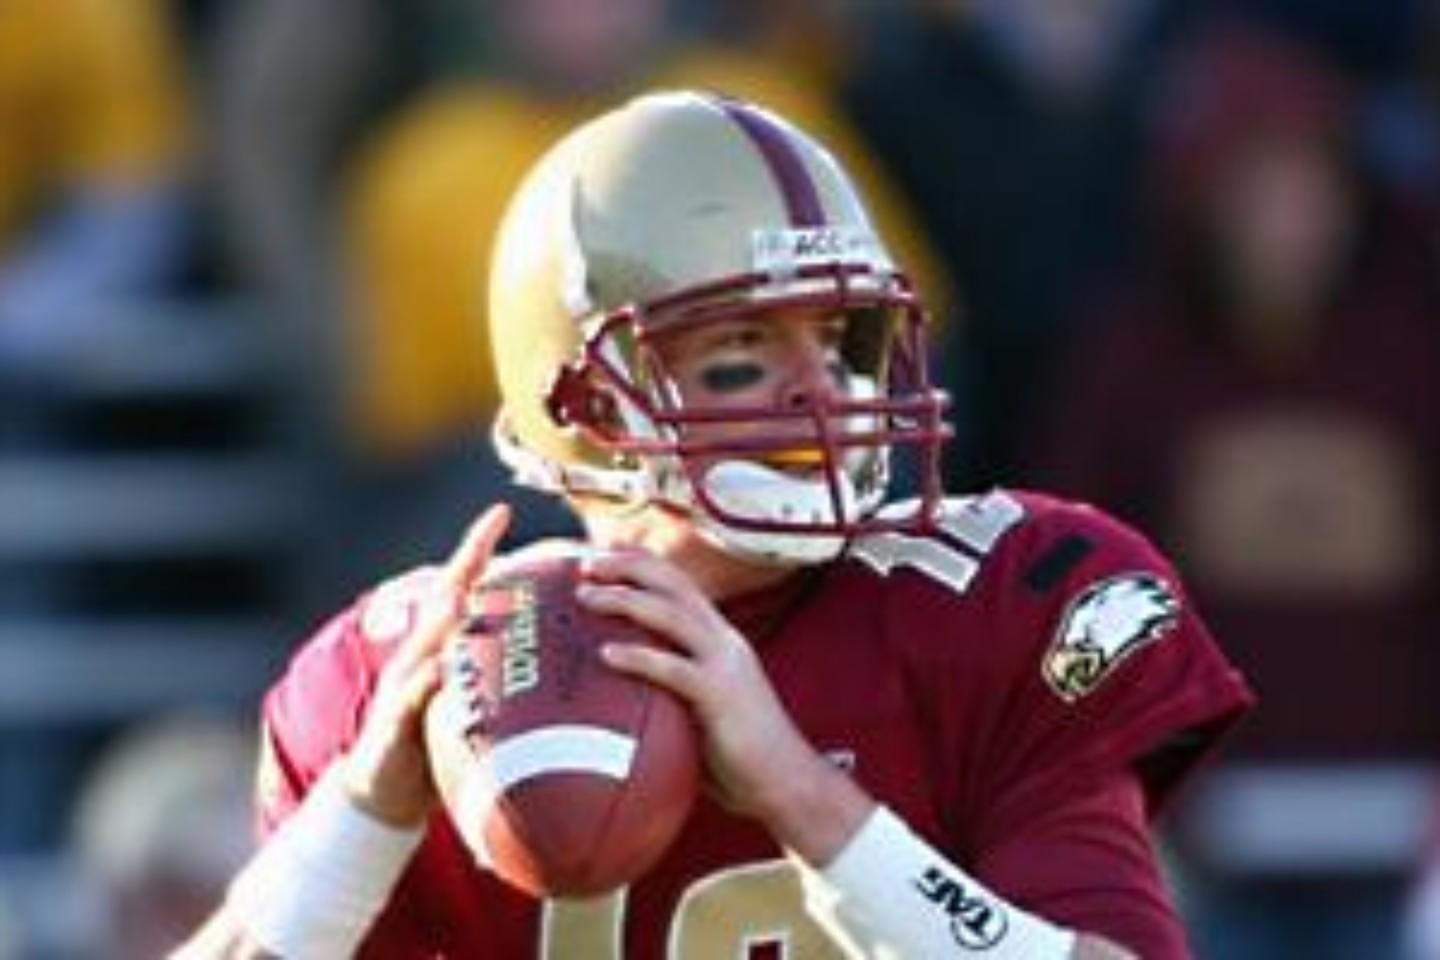 Boston College Eagles Football Tickets | Buy or Sell Boston College ...